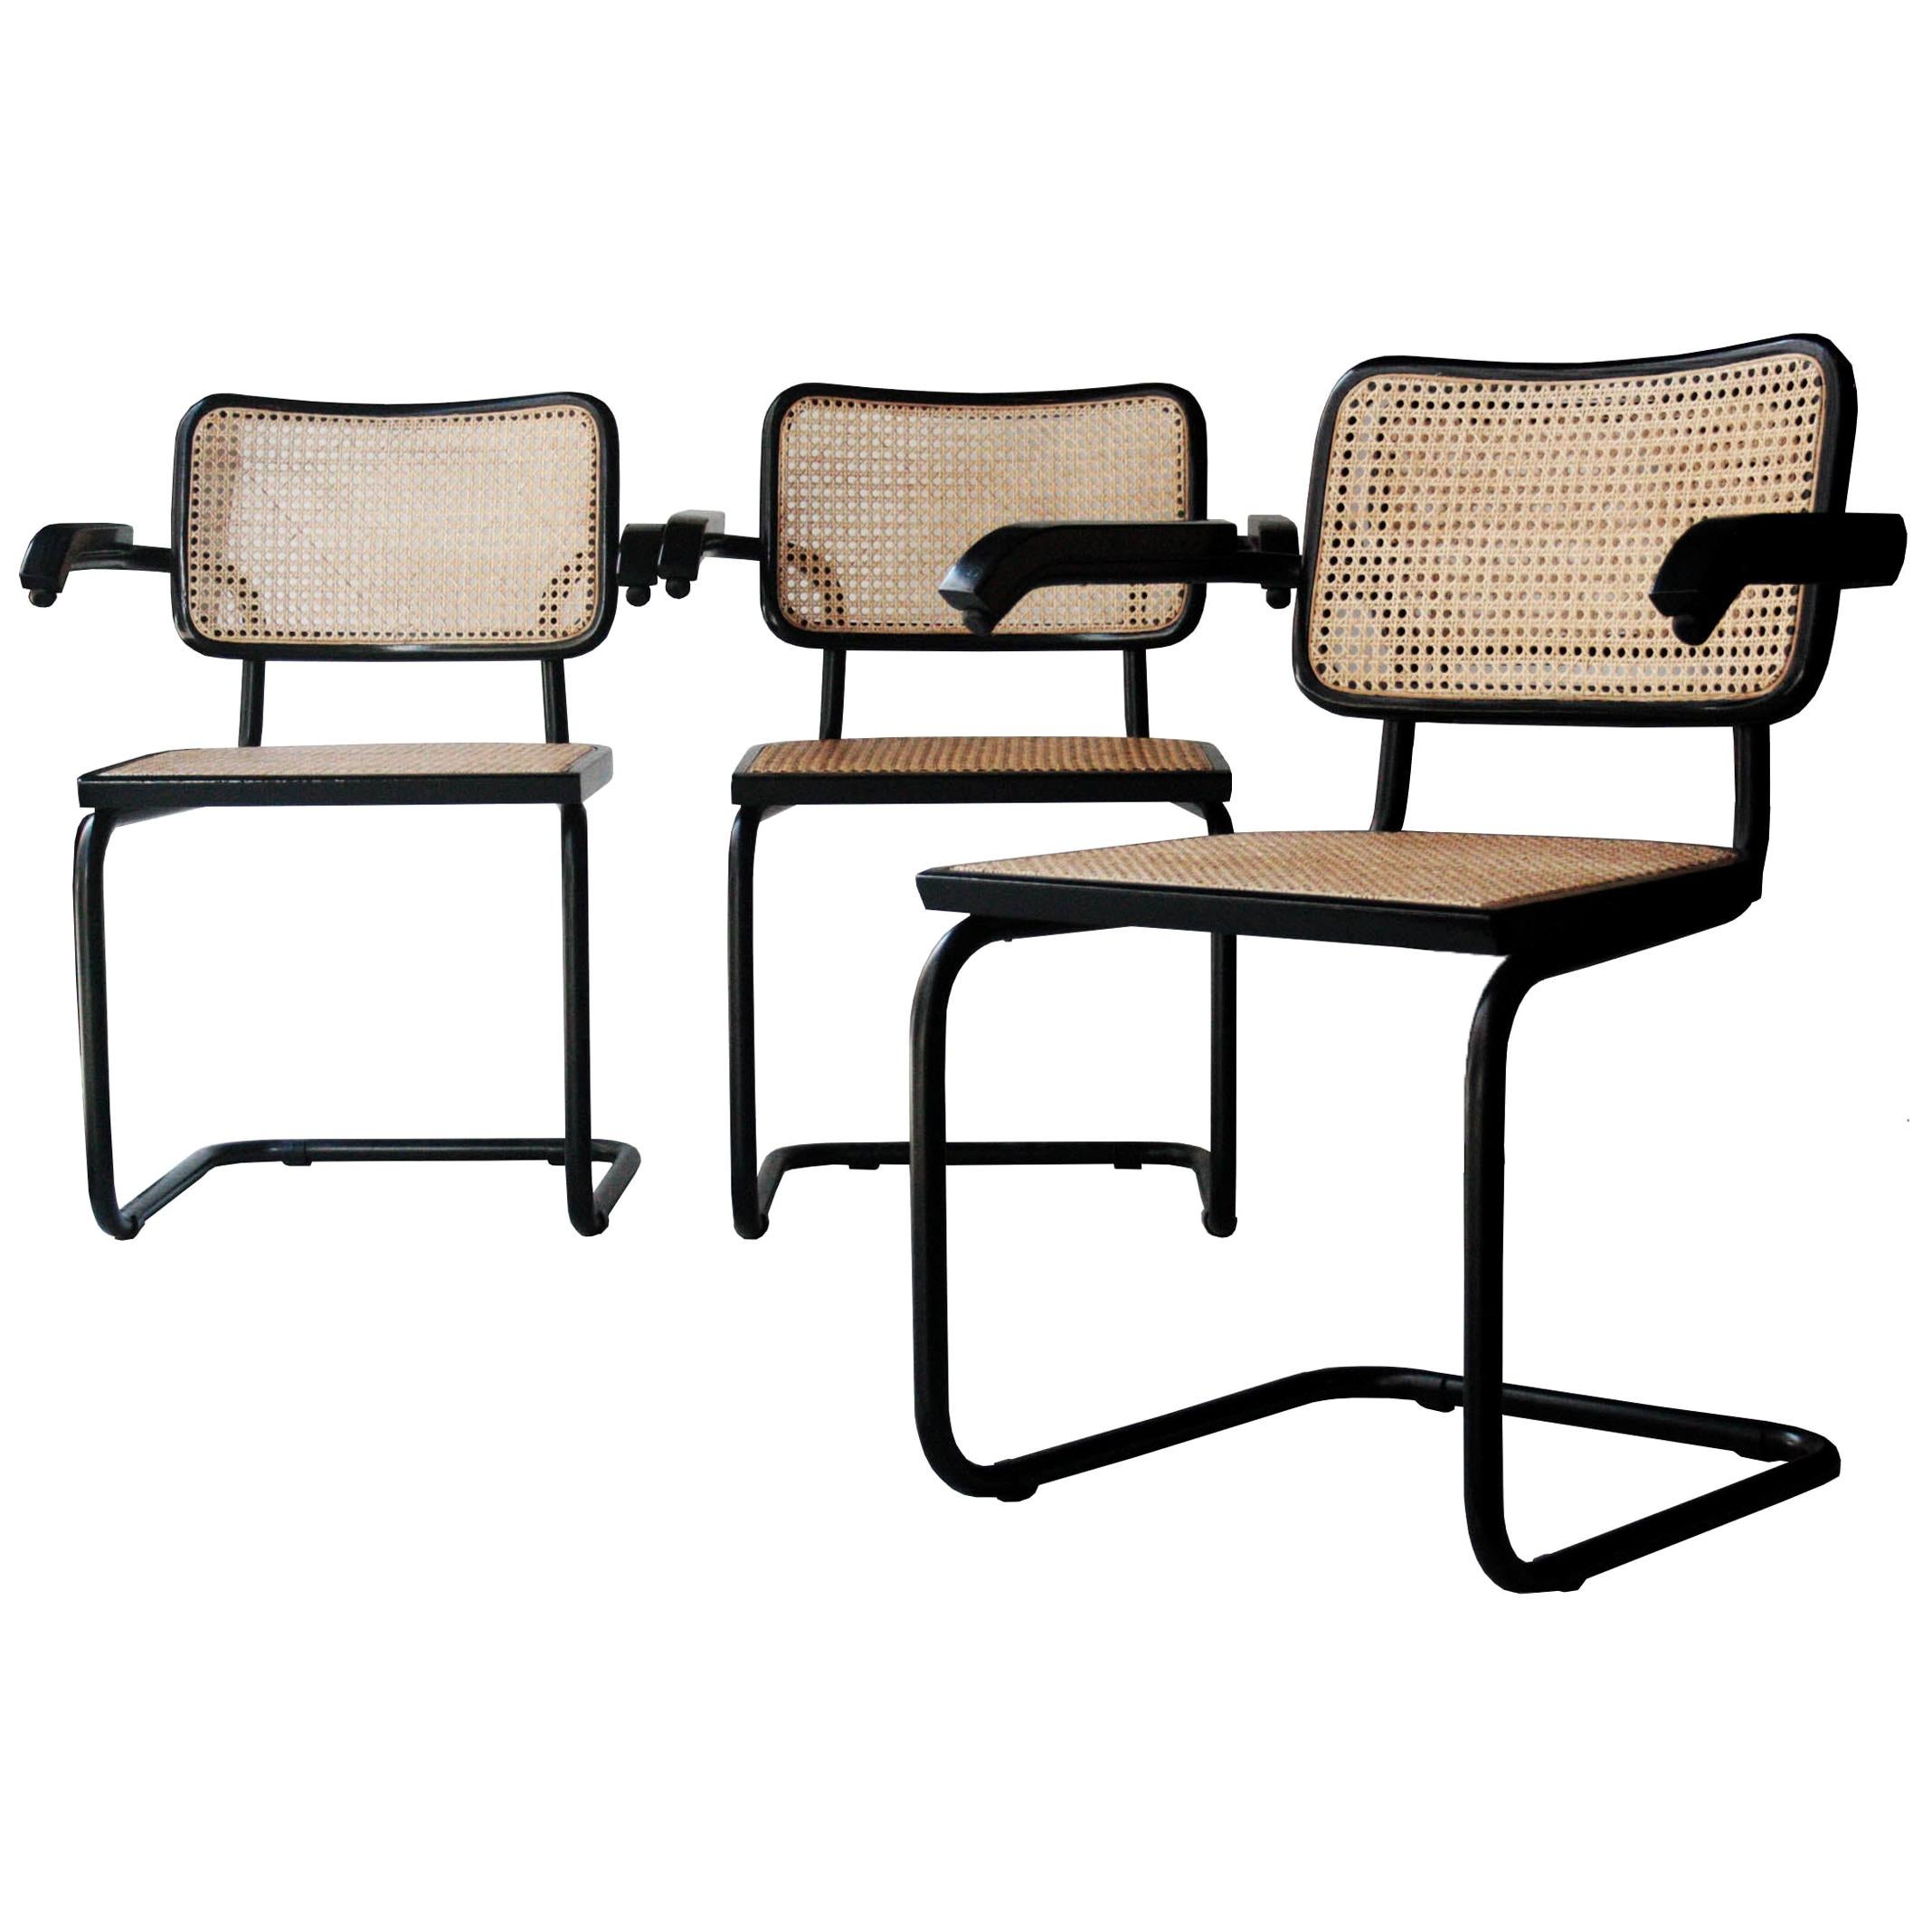 Marcel Breuer Cesca B64 Model Chairs Lacquered in Black, Italy, 1962